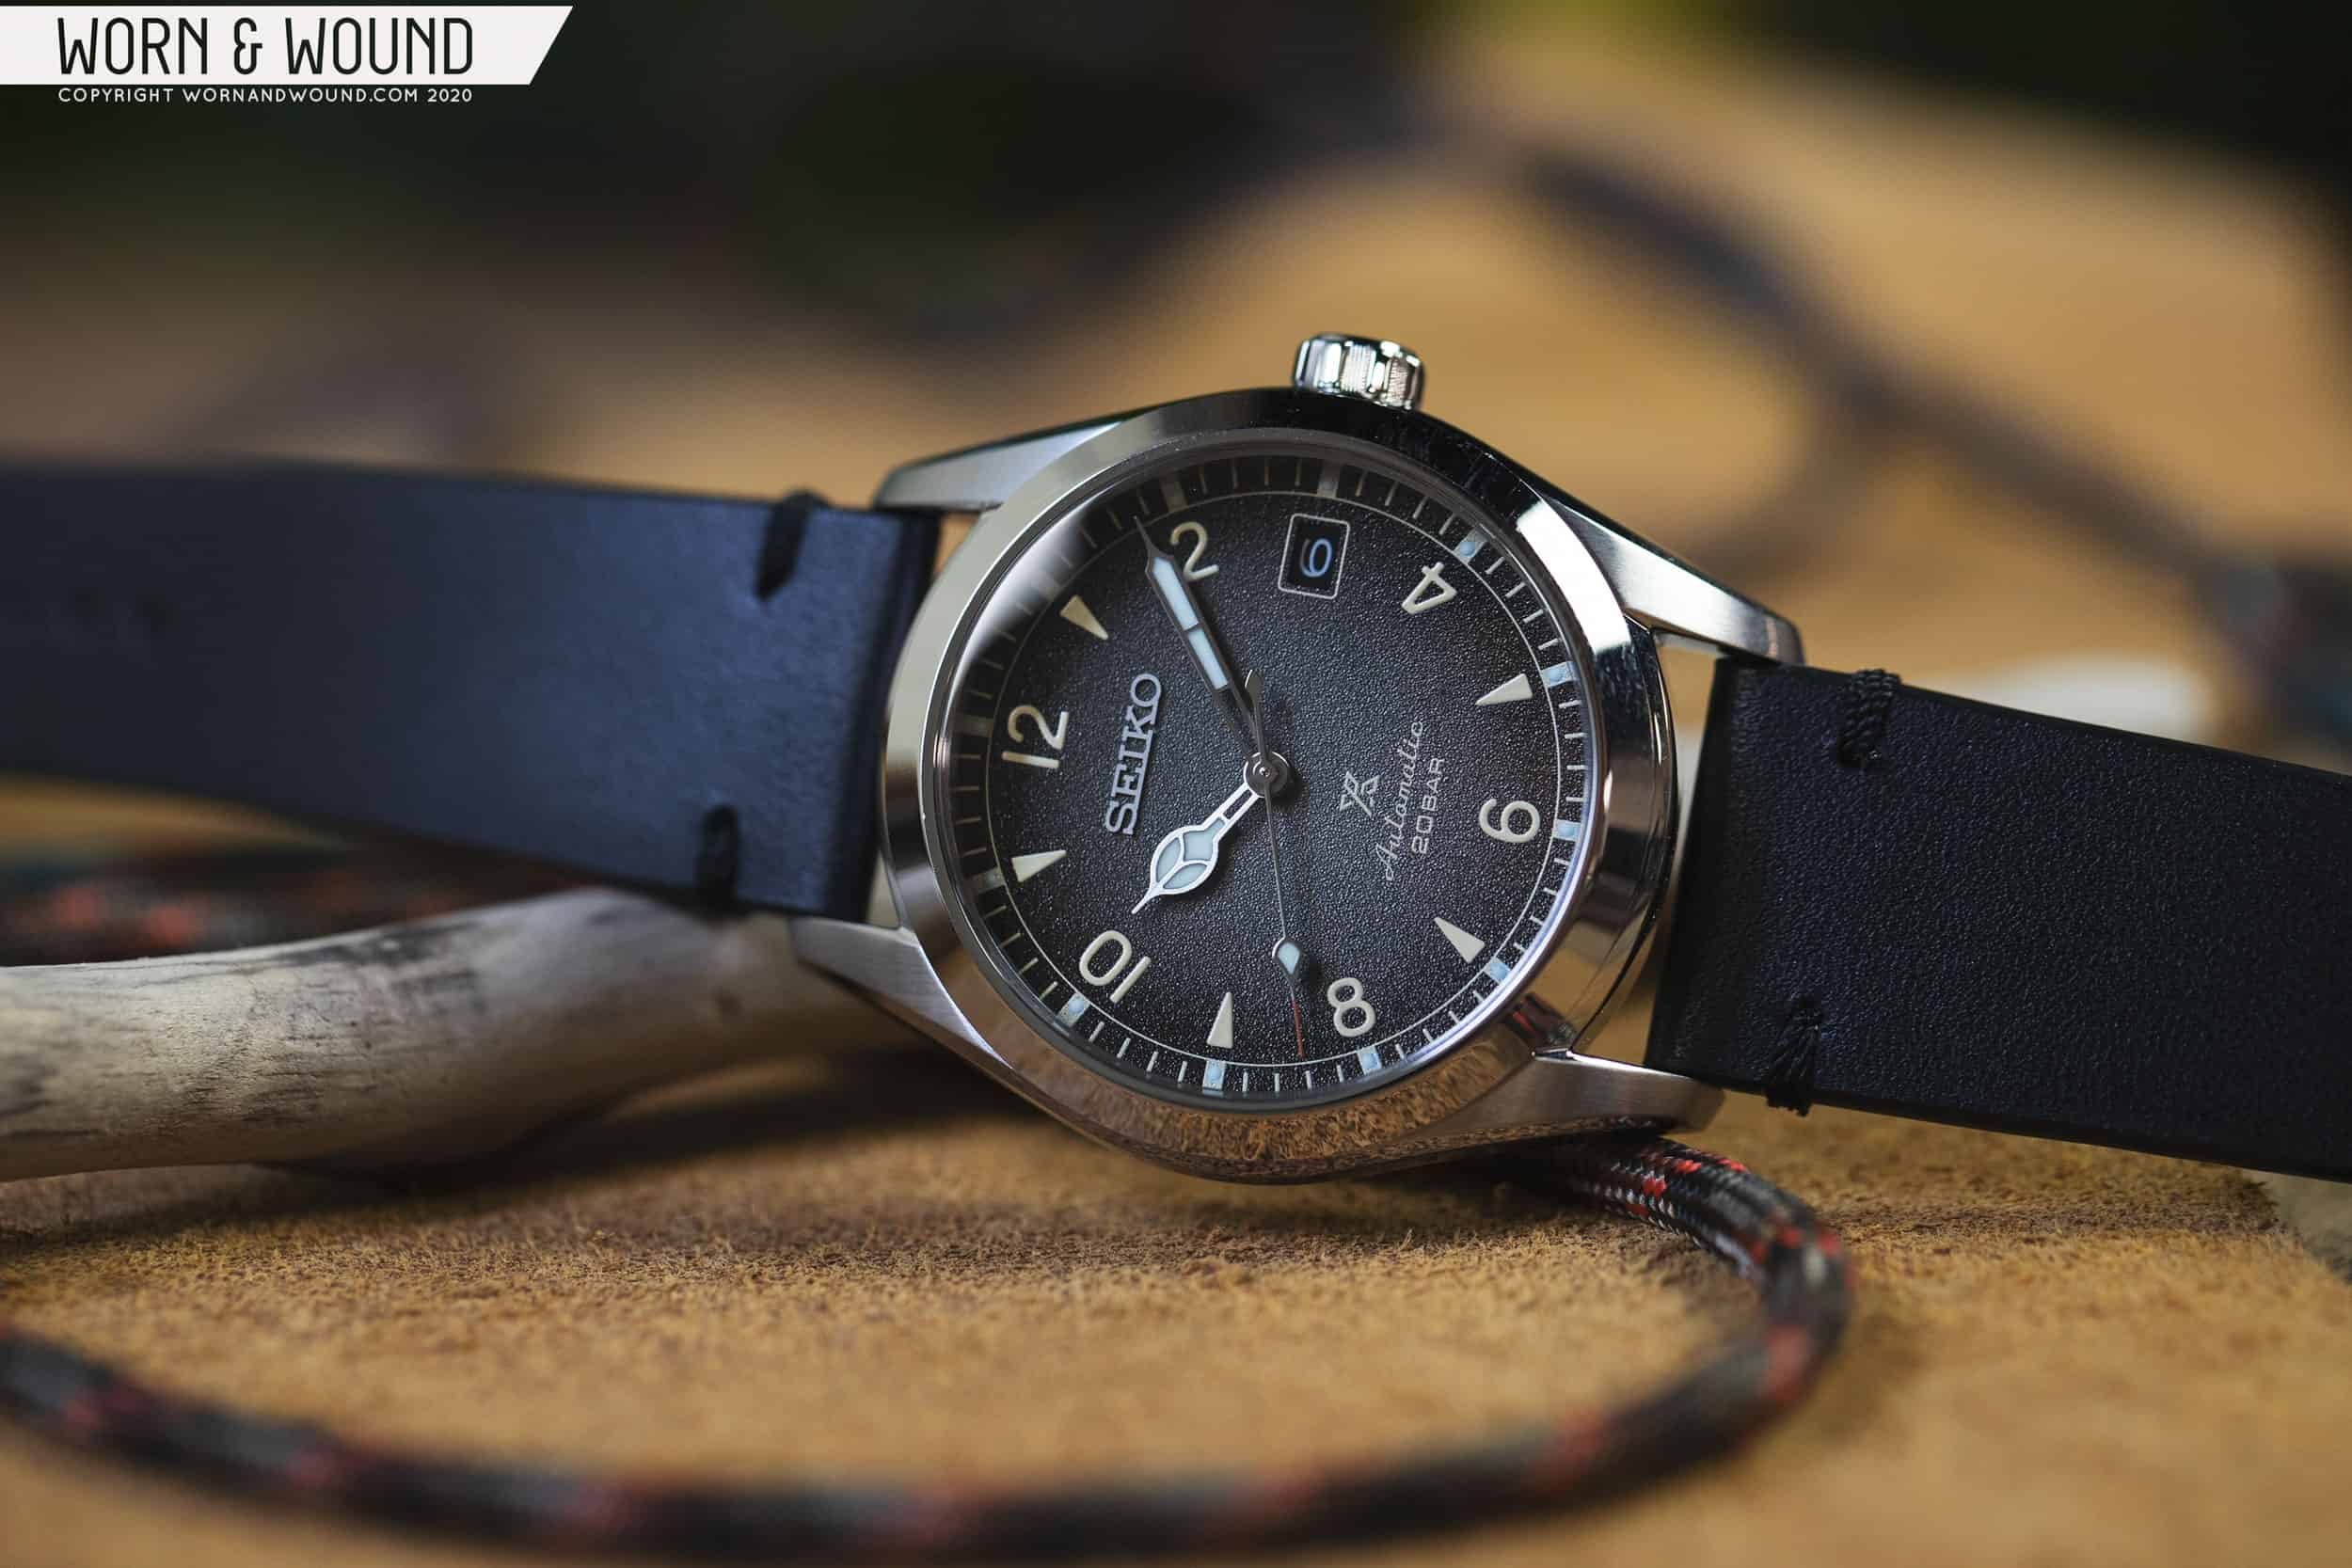 First Look: Seiko Expands Their Alpinist Line With A New, Smaller Model Worn  Wound 